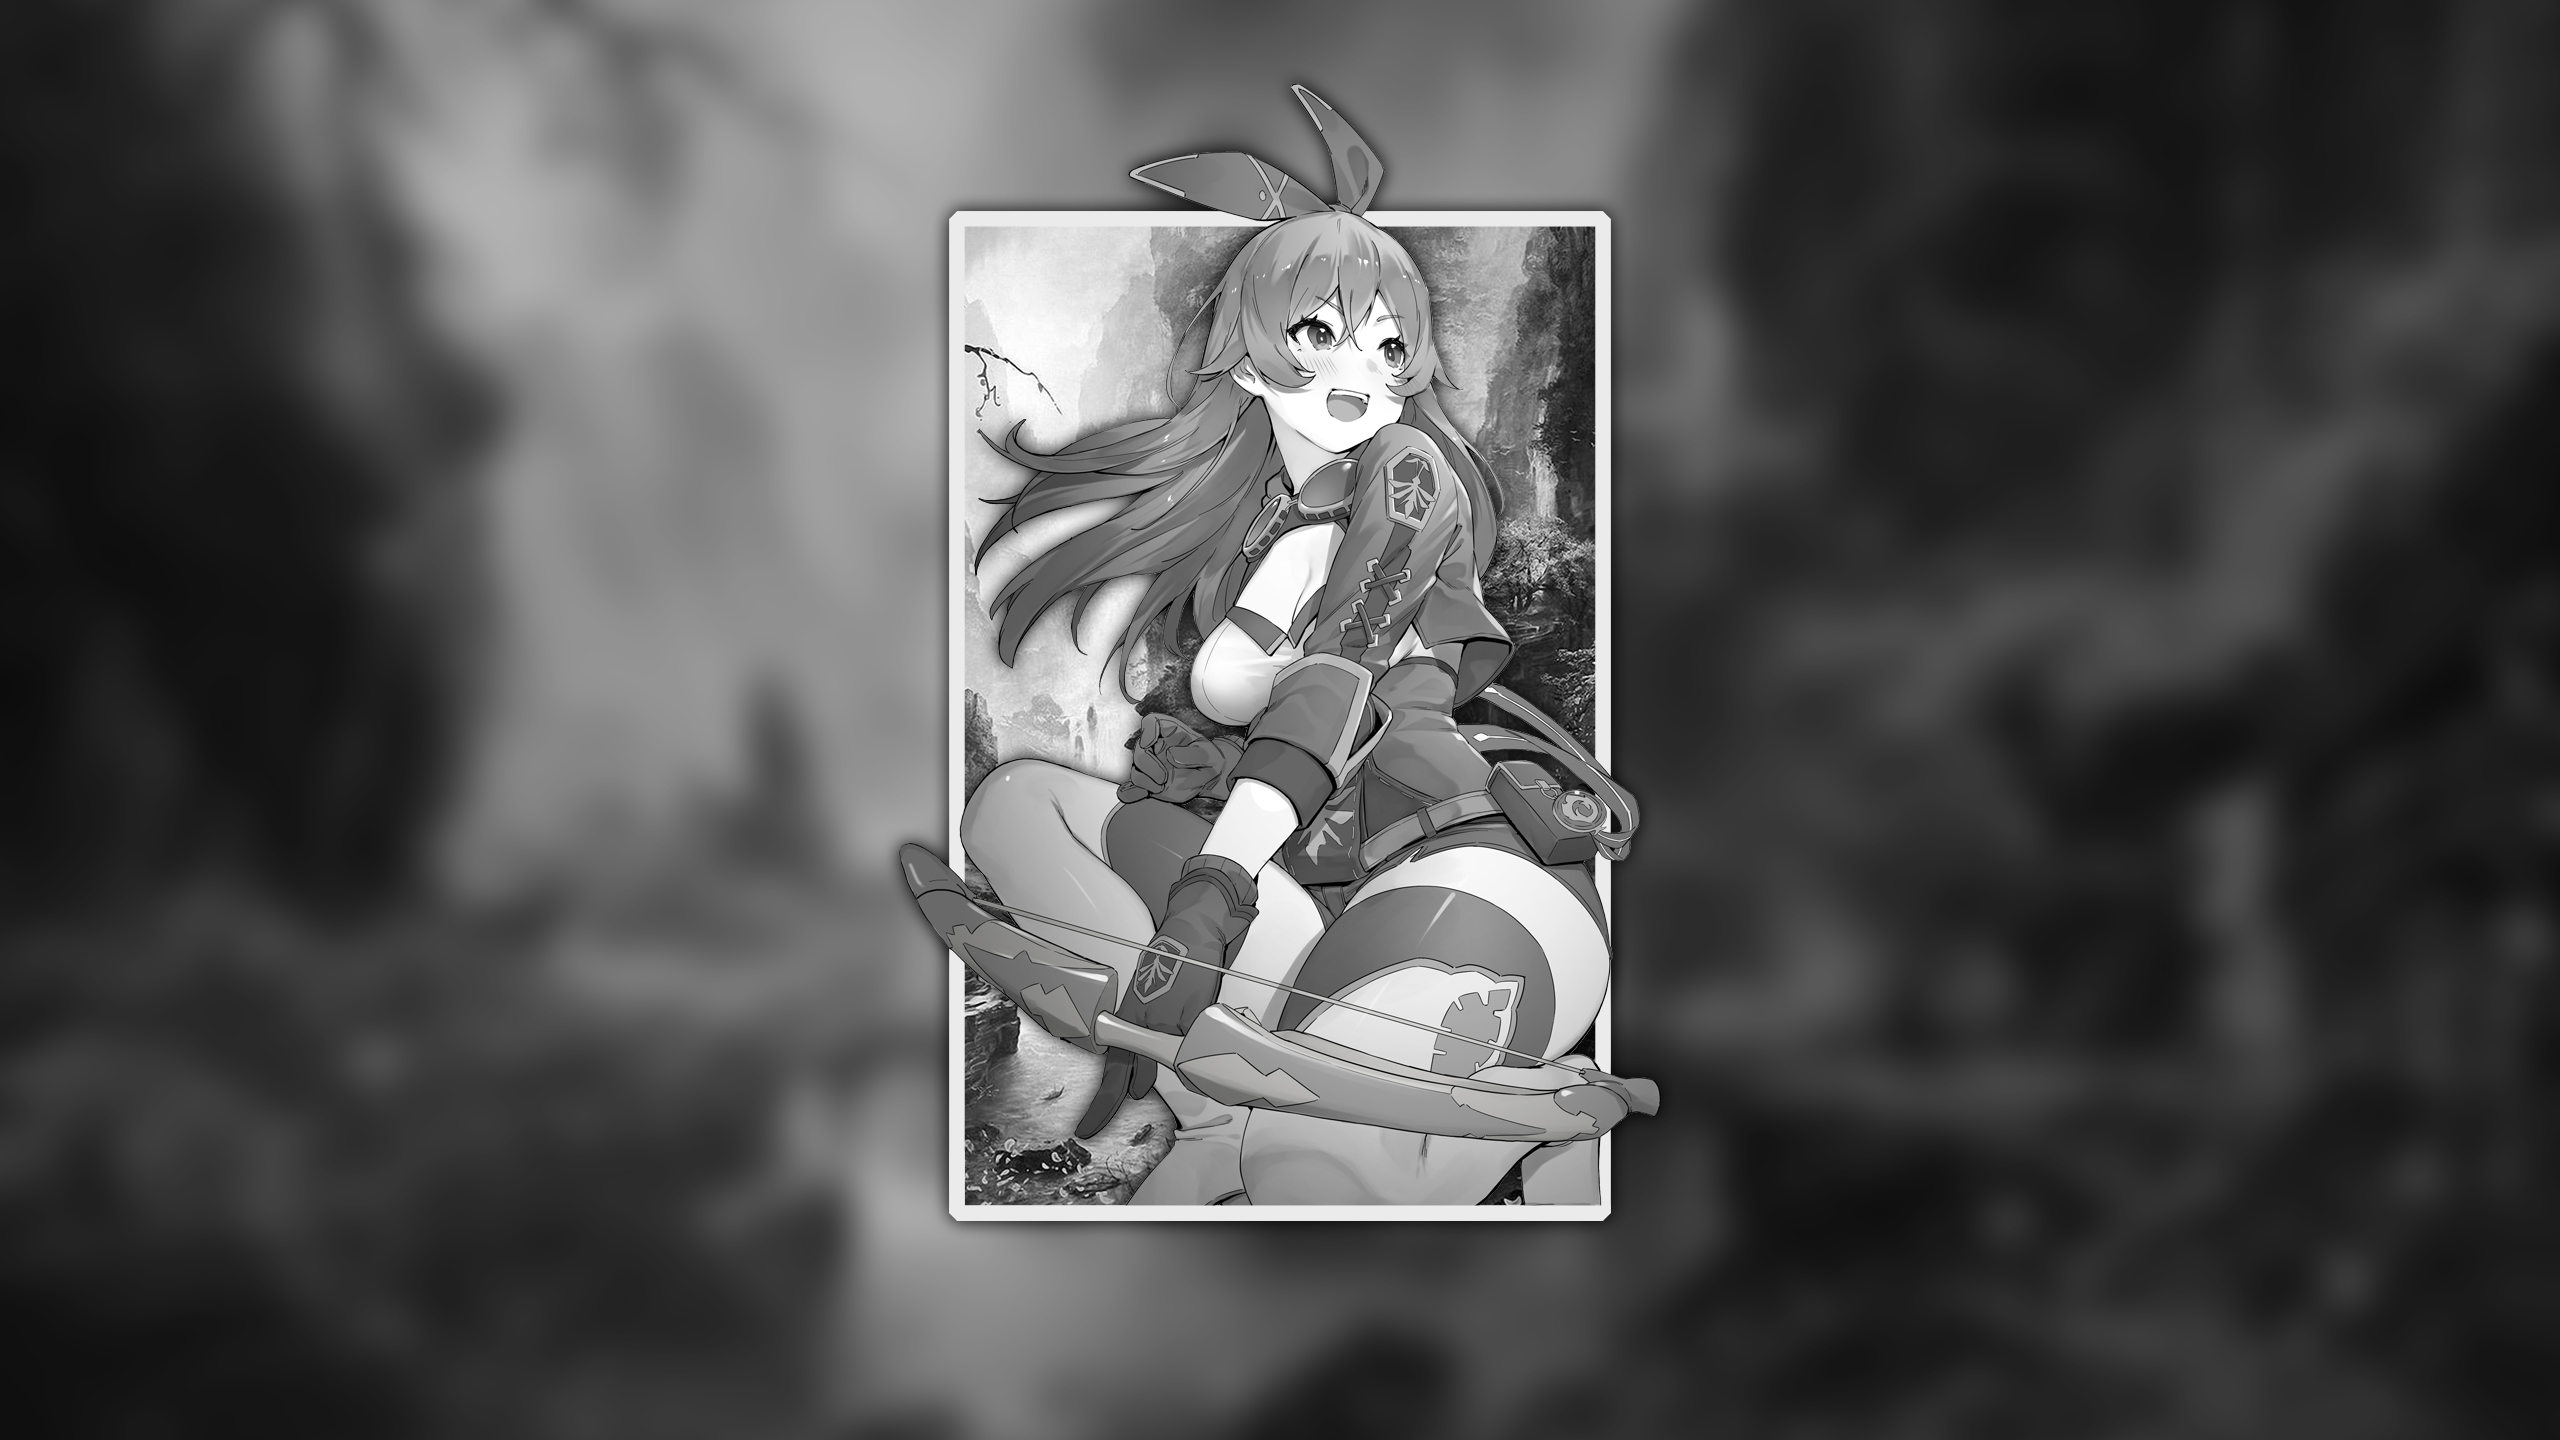 Monochrome Anime RPG Renders In Shapes Bow And Arrow Amber Genshin Impact  Picture In Picture Wallpaper - Resolution:2560x1440 - ID:1198834 -  